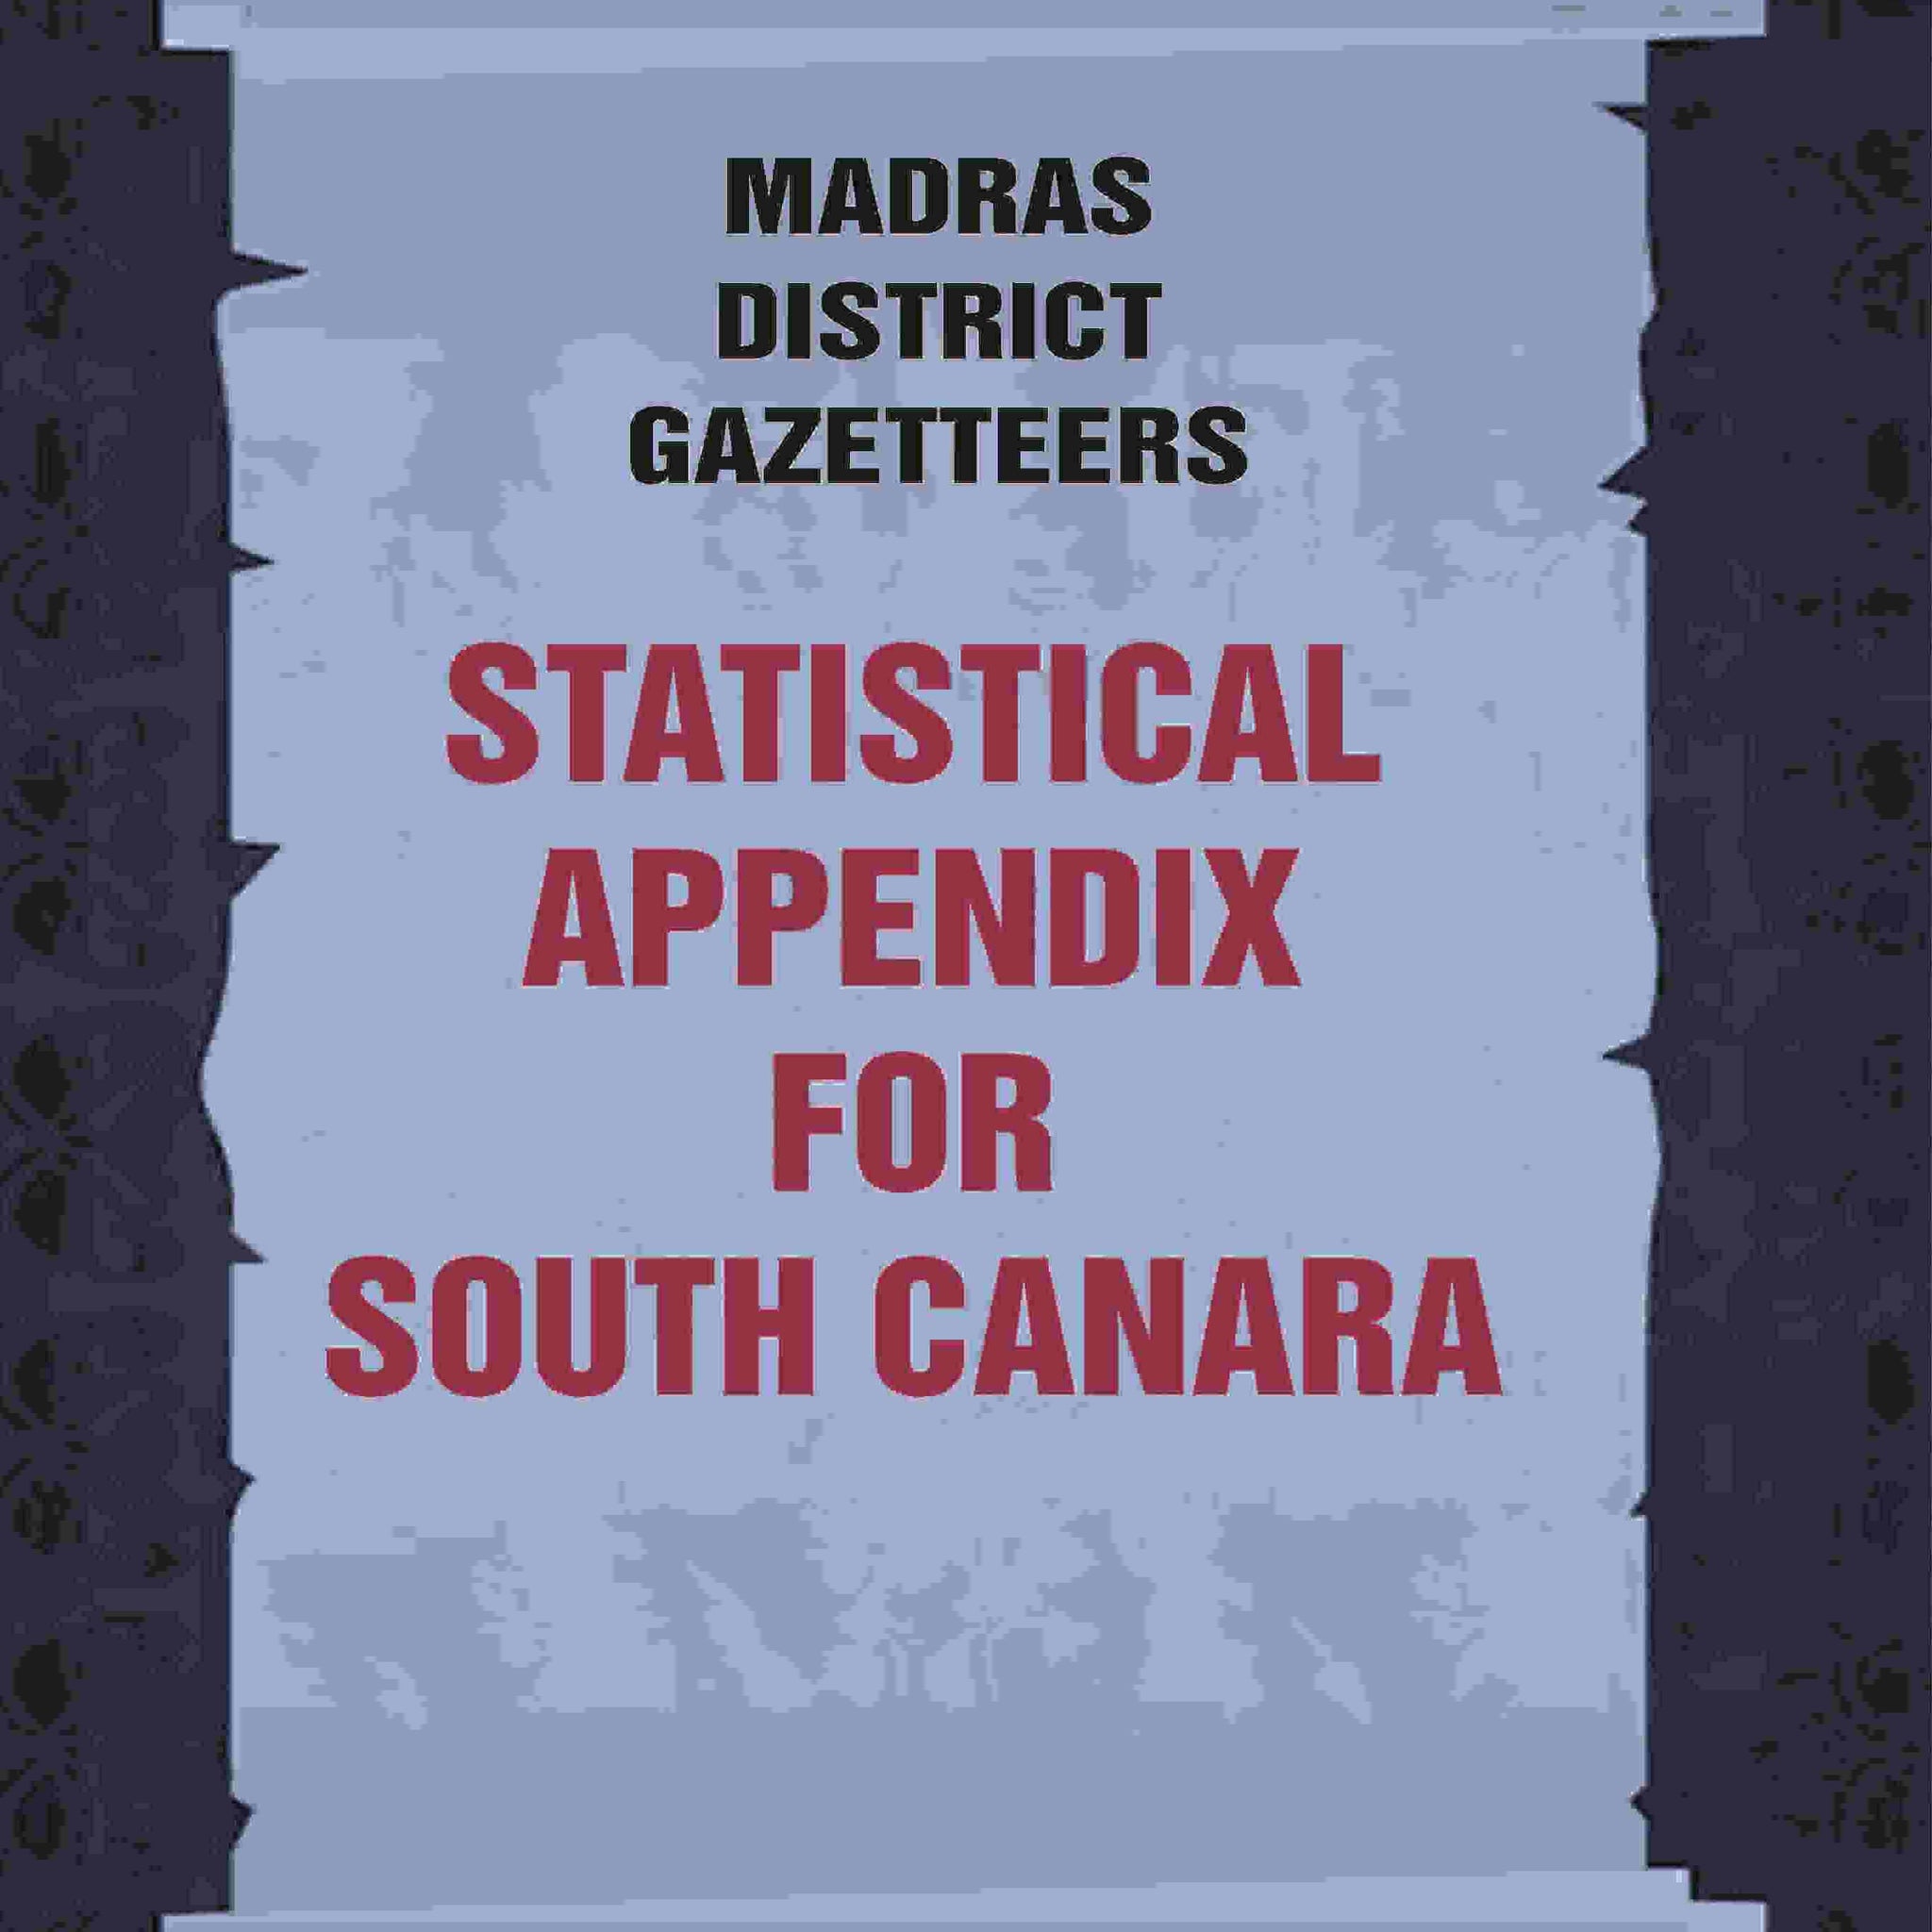 Madras District Gazetteers: Statistical Appendix For South Canara